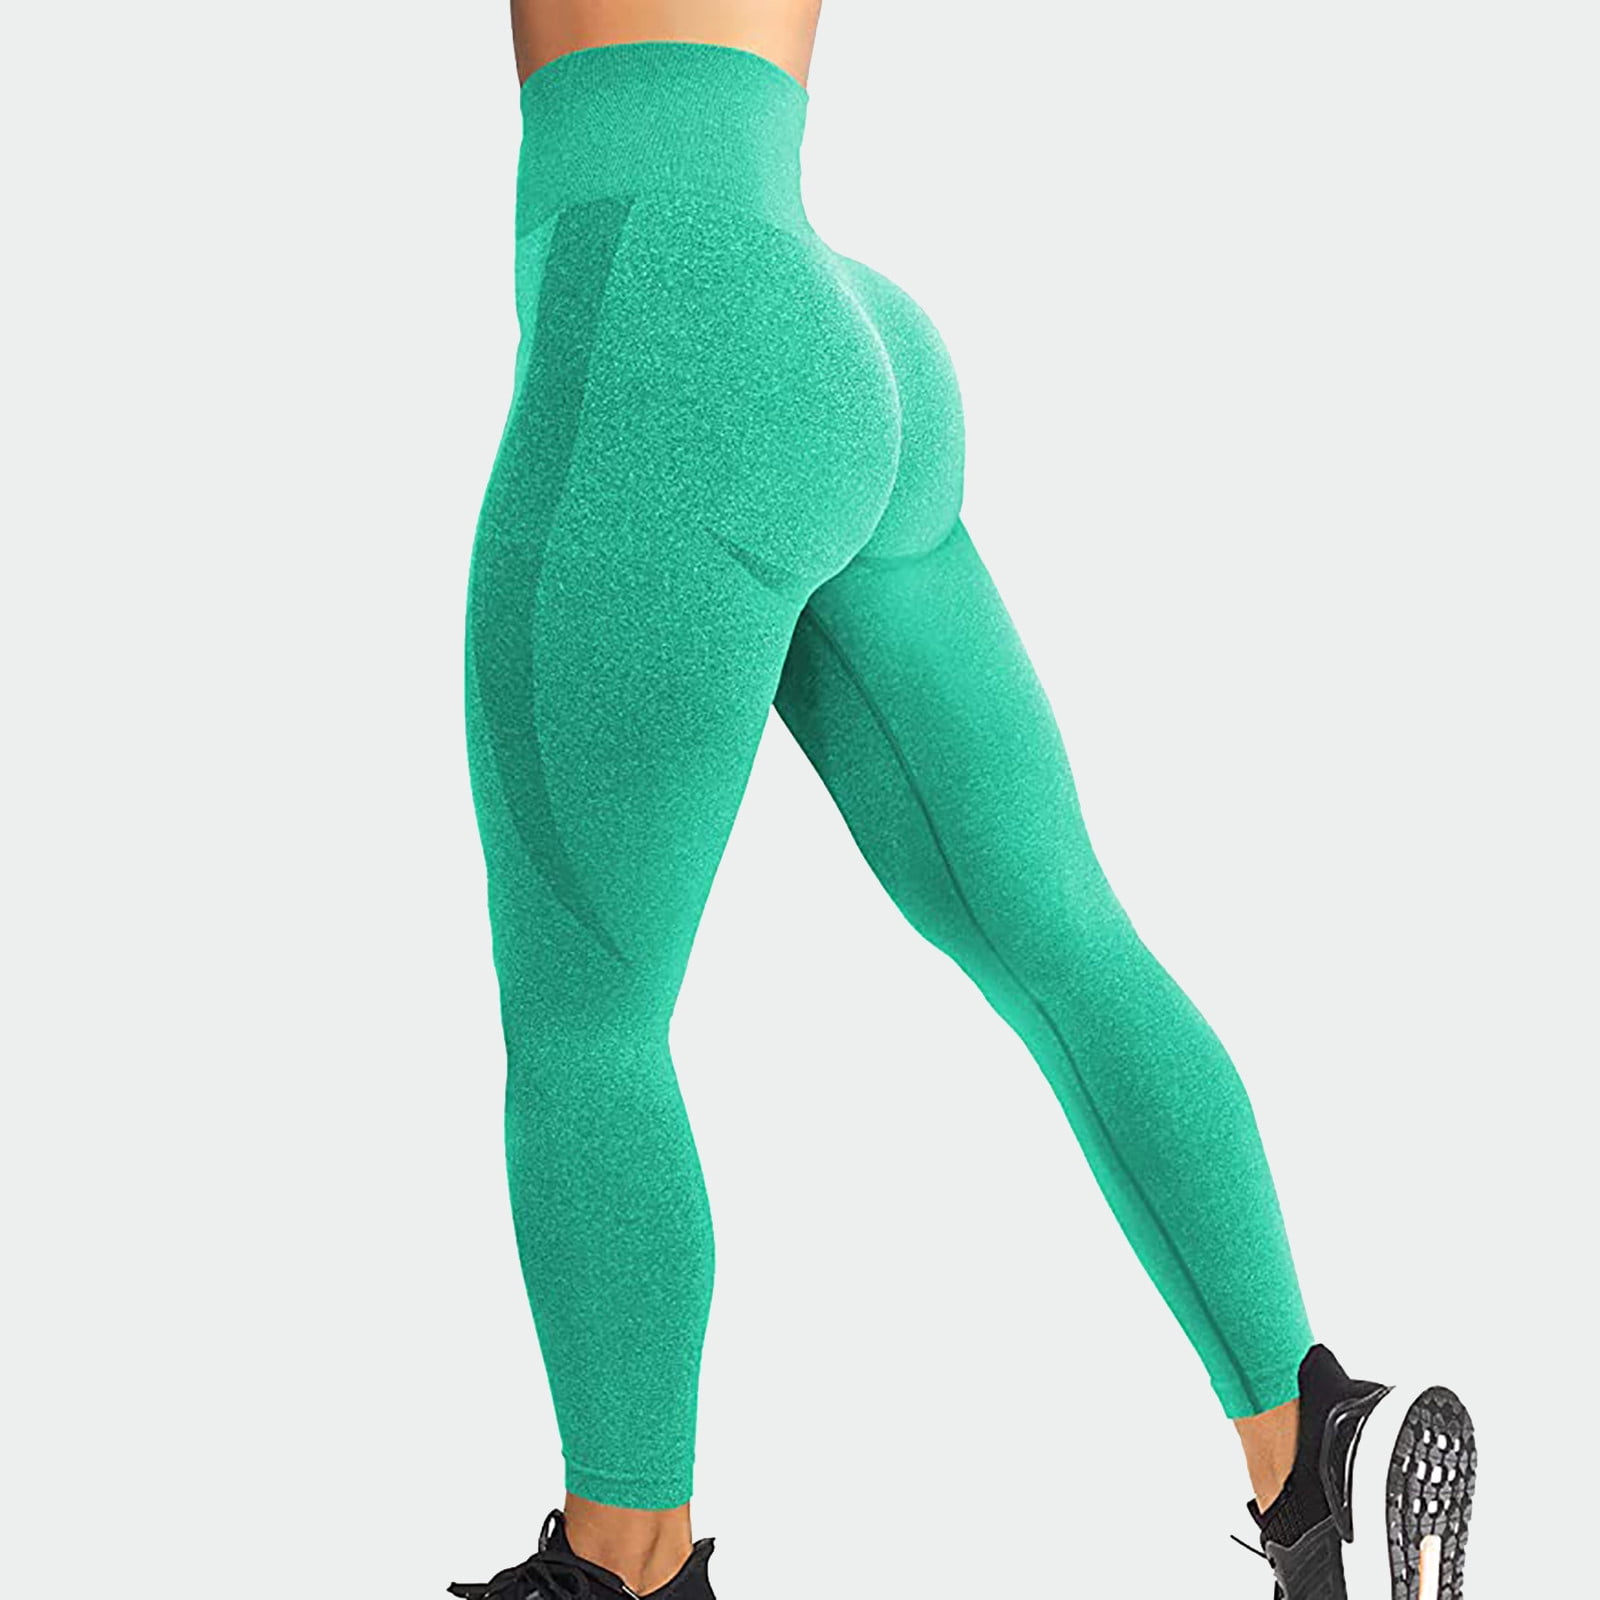 Aayomet Yoga Pants For Women Women's Bootcut Yoga Pants with Pockets High  Waist Flare Leggings Stretchy Wide Leg Dress Pants,Green S 